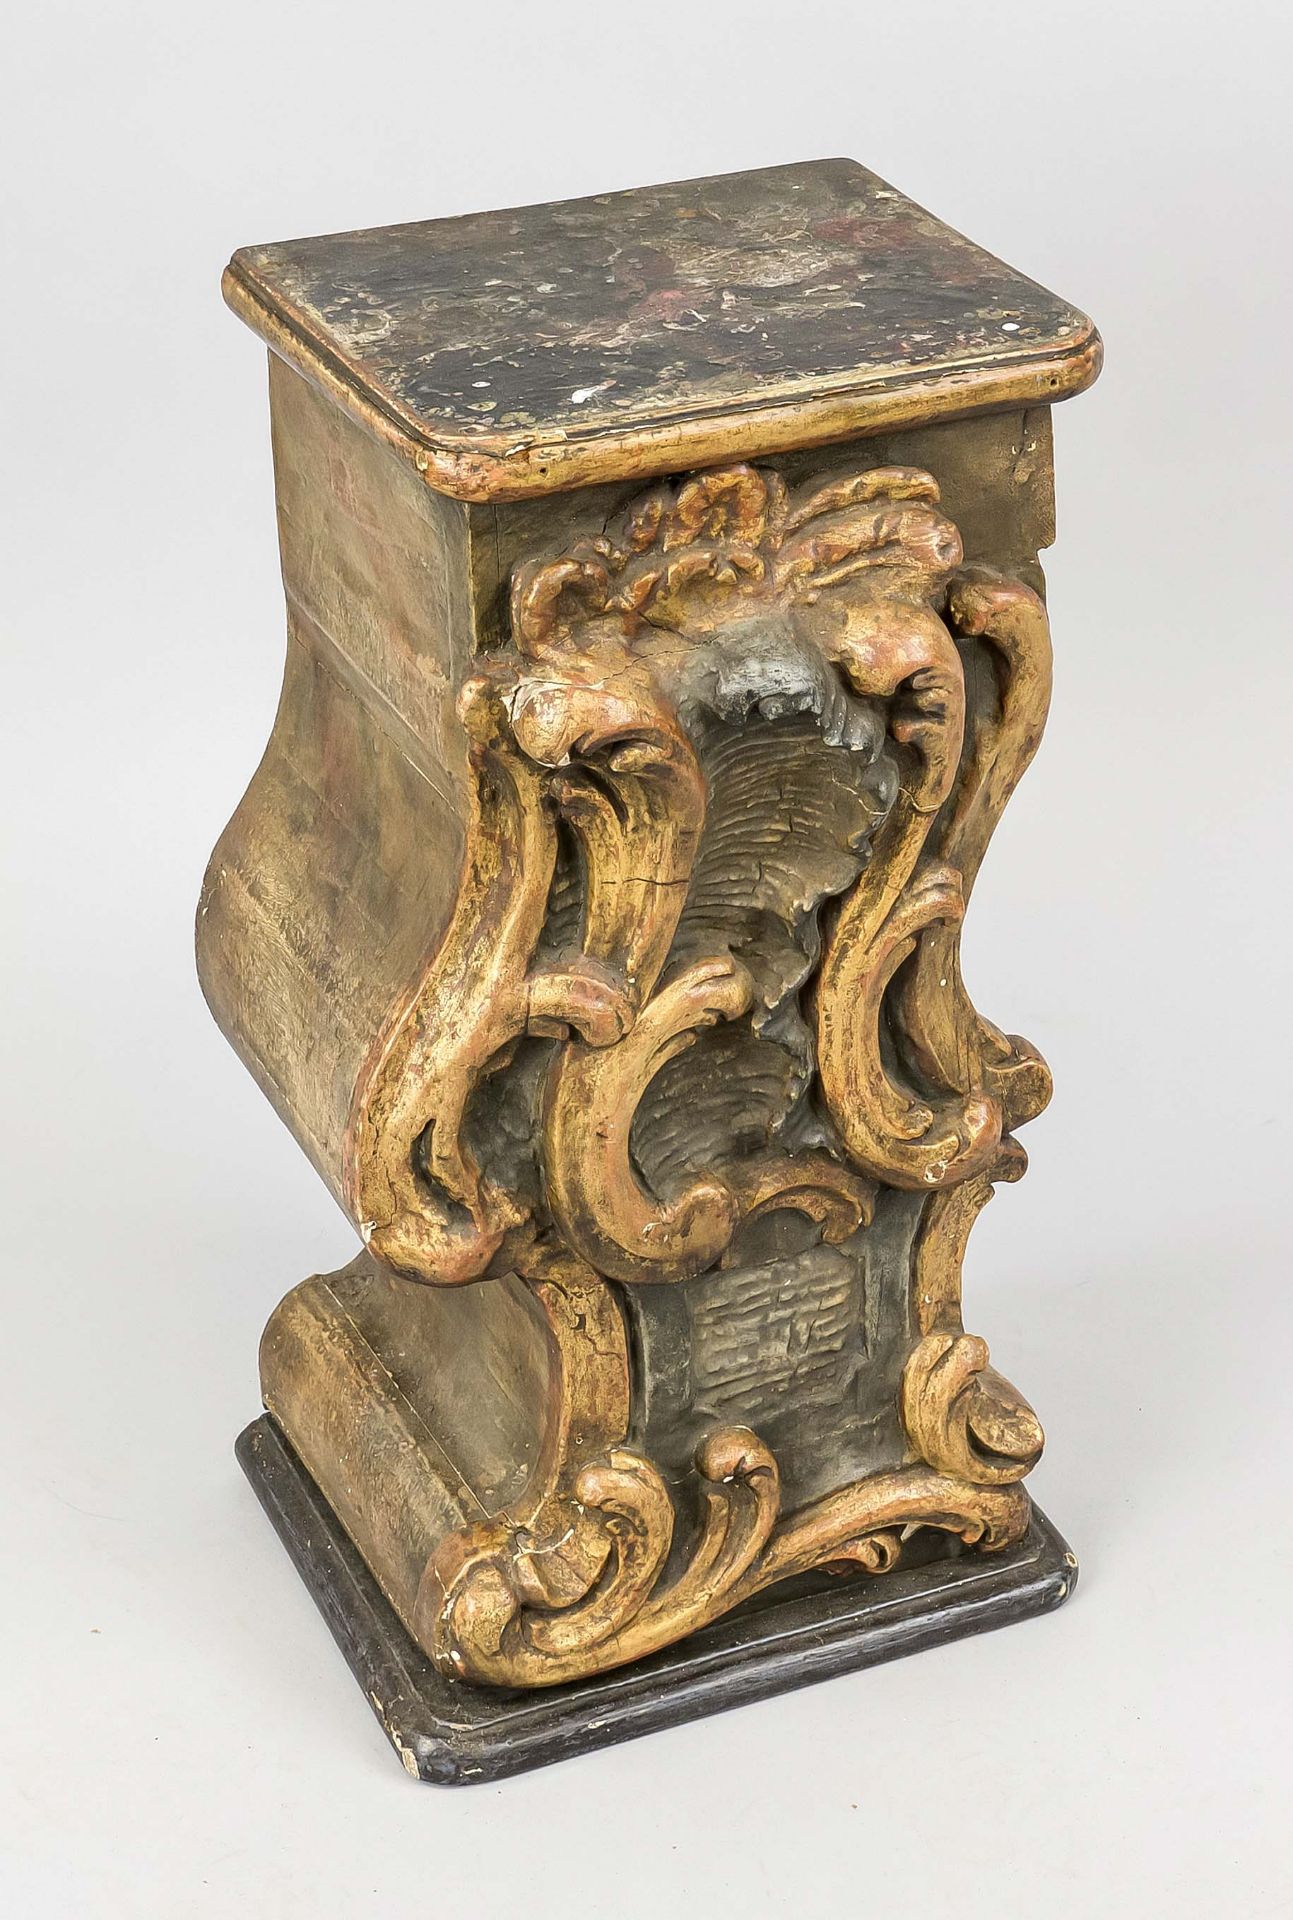 Baroque console, 18th century, carved wood, polychrome and gold painted, rubbed & chipped, h. 55 cm